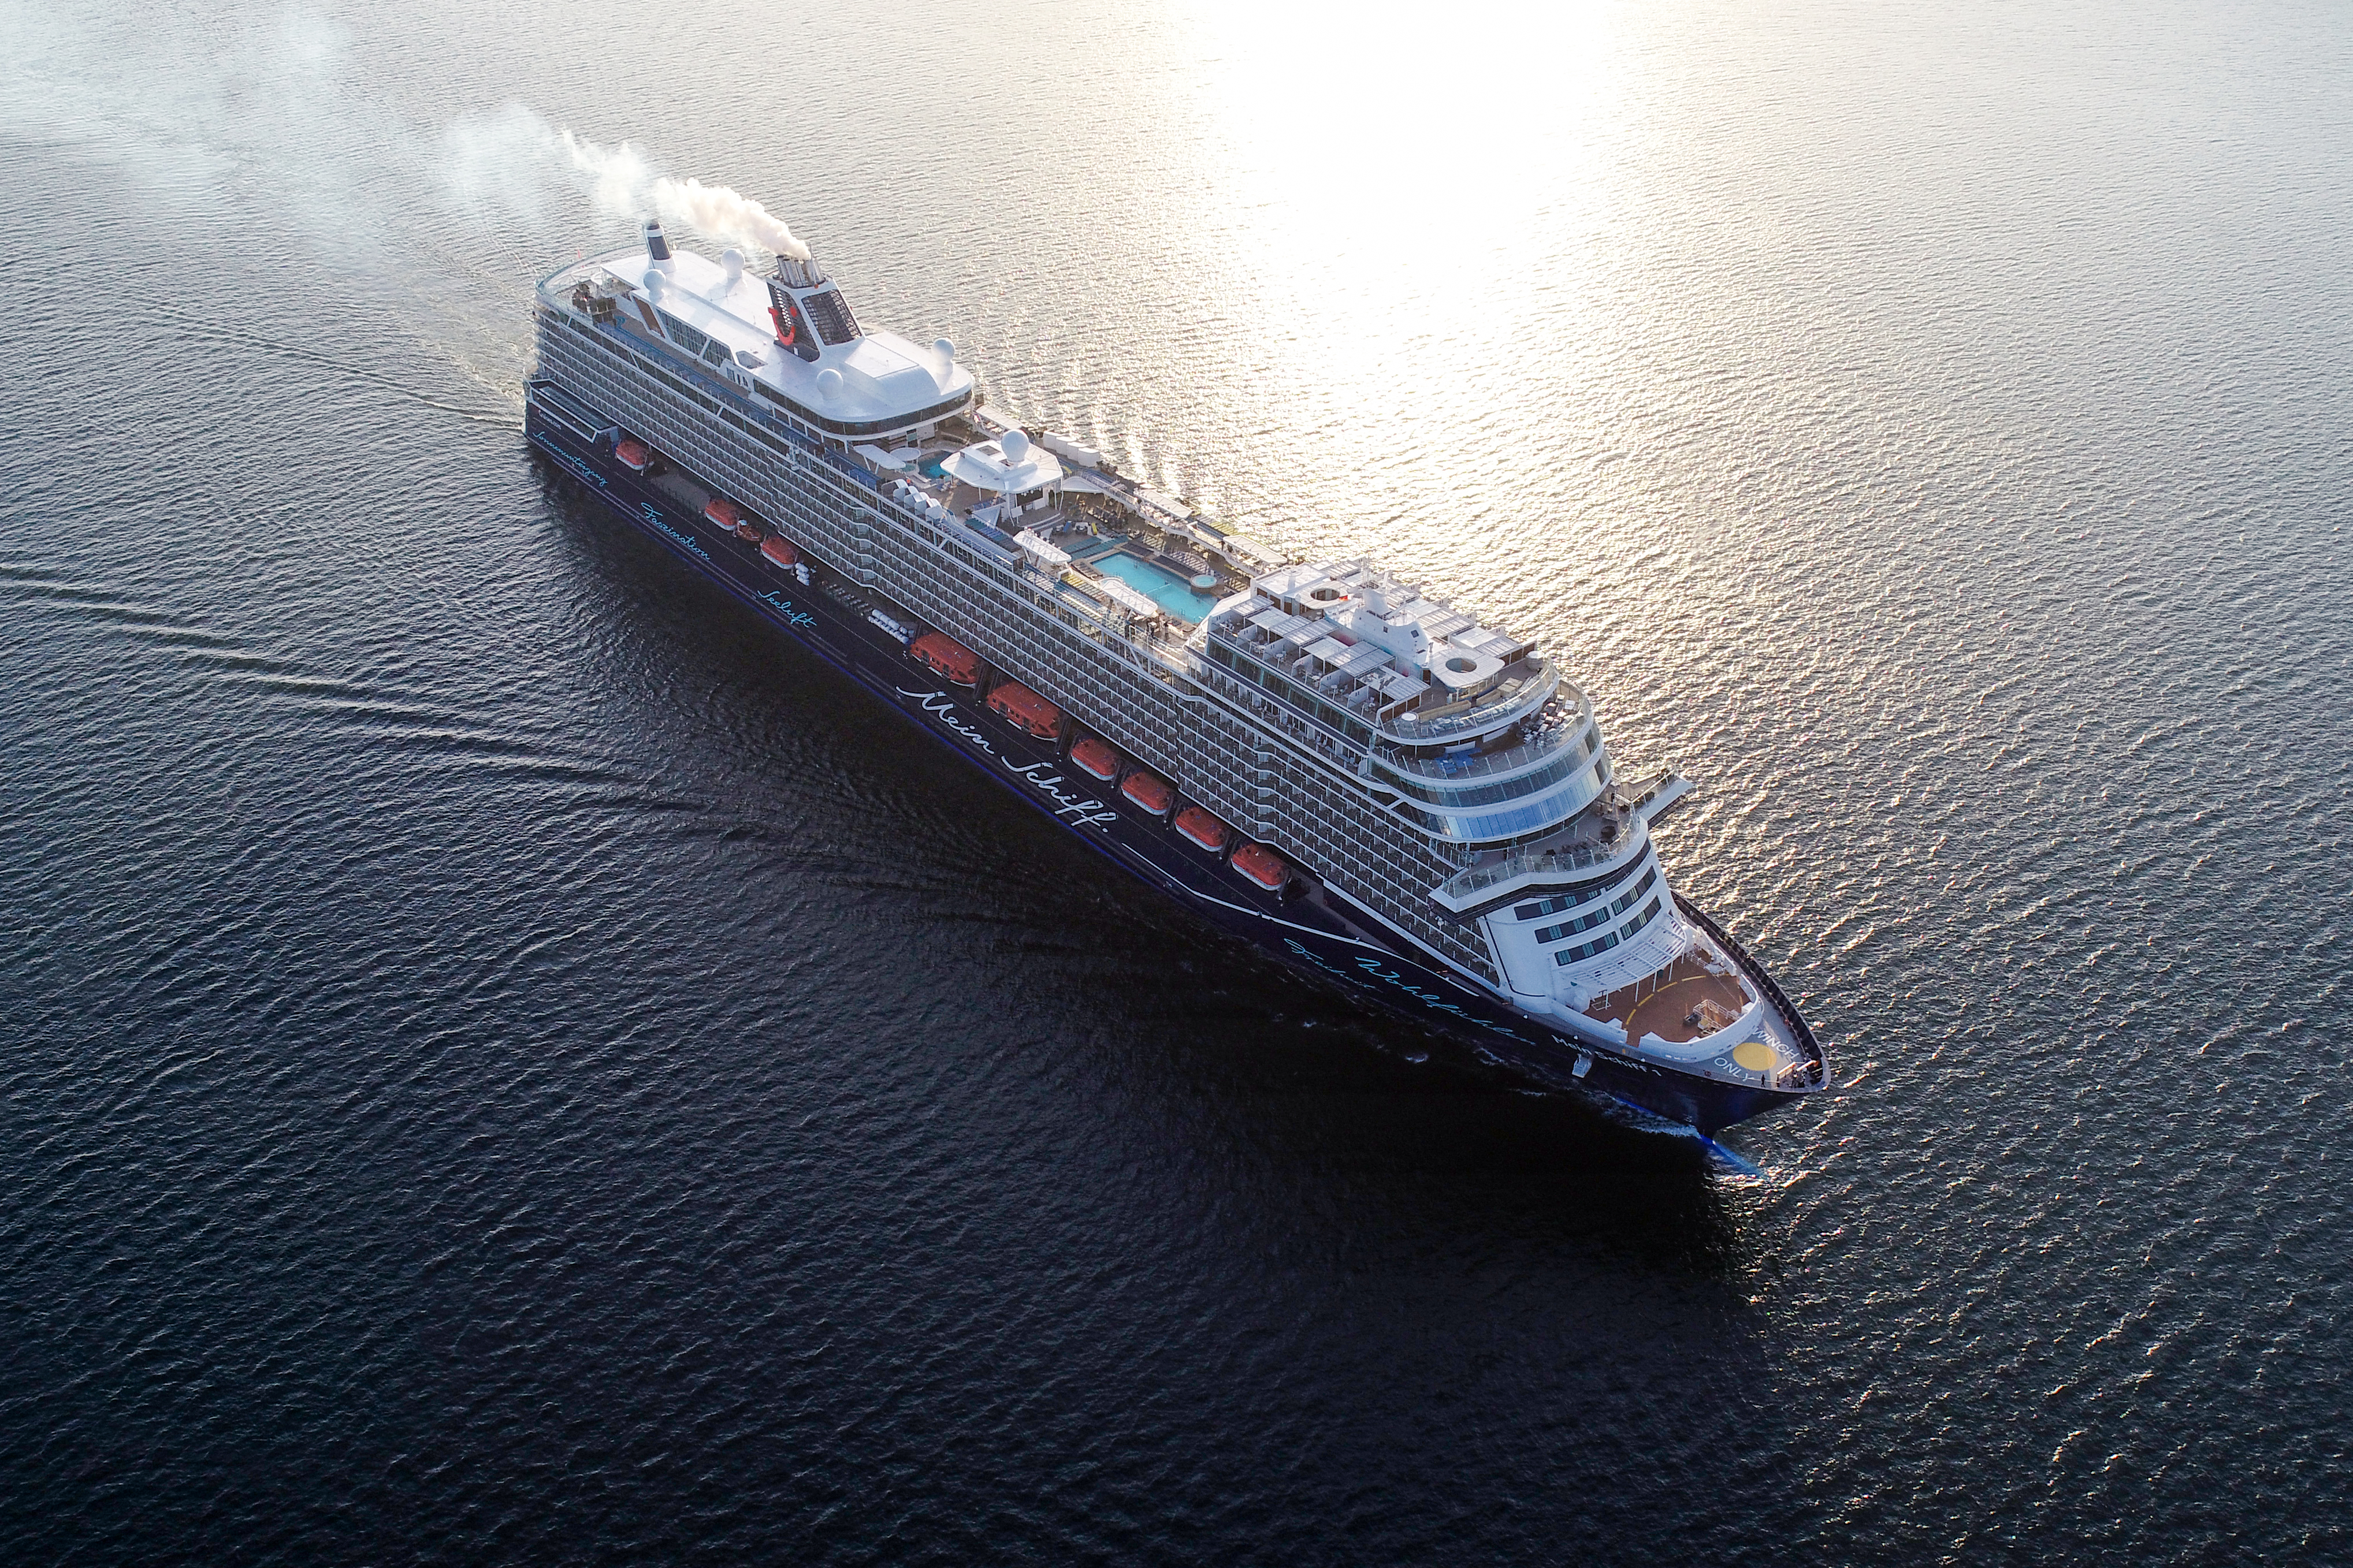 Cruise ship &quot;Mein Schiff 1&quot; with SpatialSound Wave technology from Fraunhofer IDMT